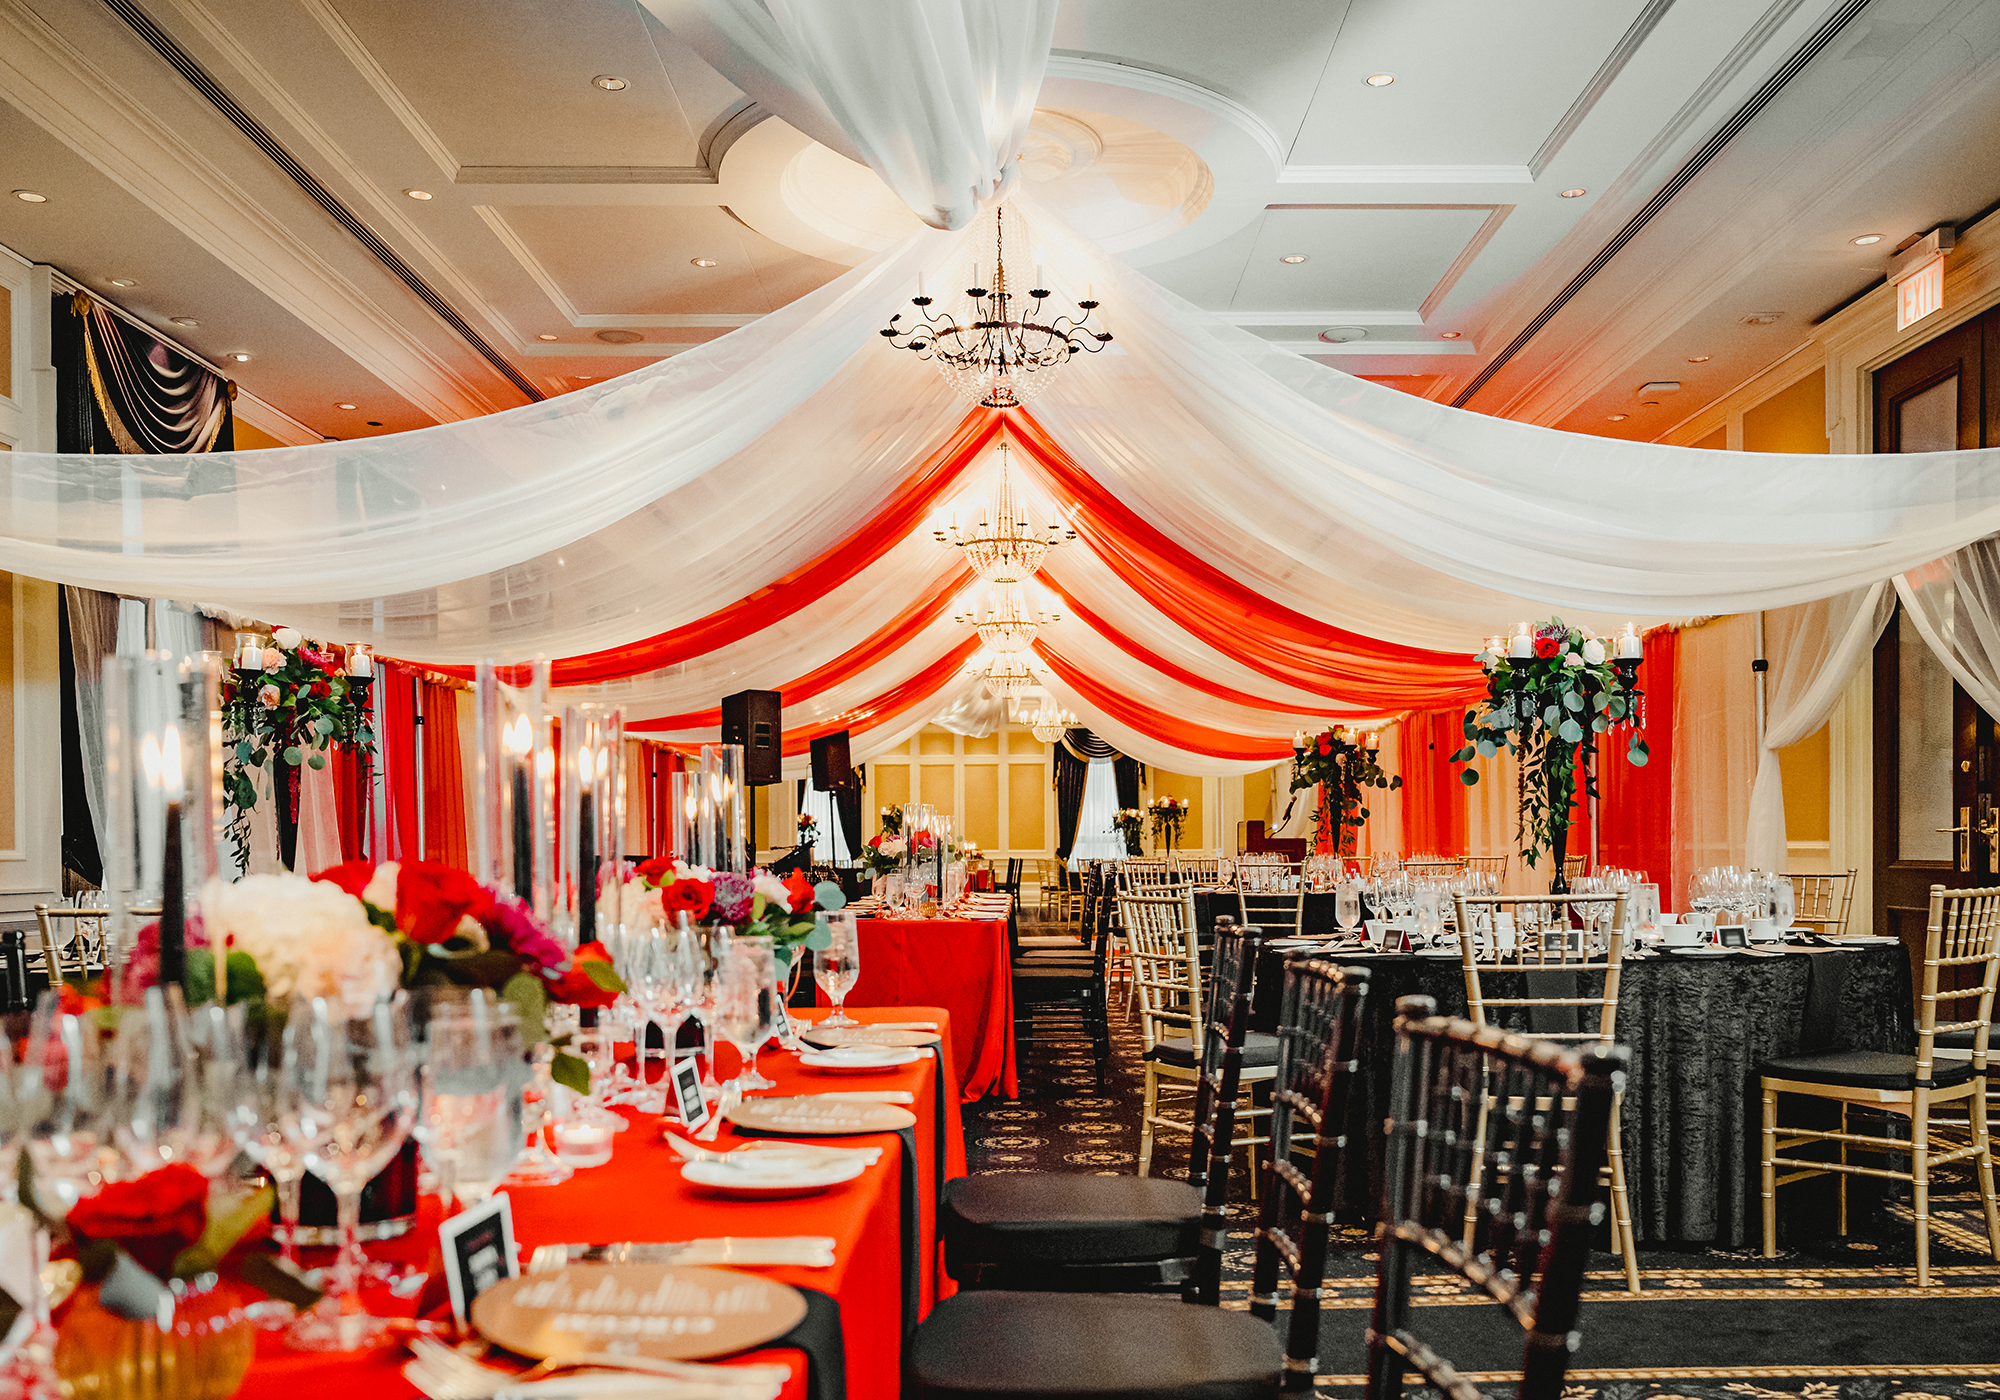 Ballroom decorated for the Circus gala. (Black & Gold Photography)